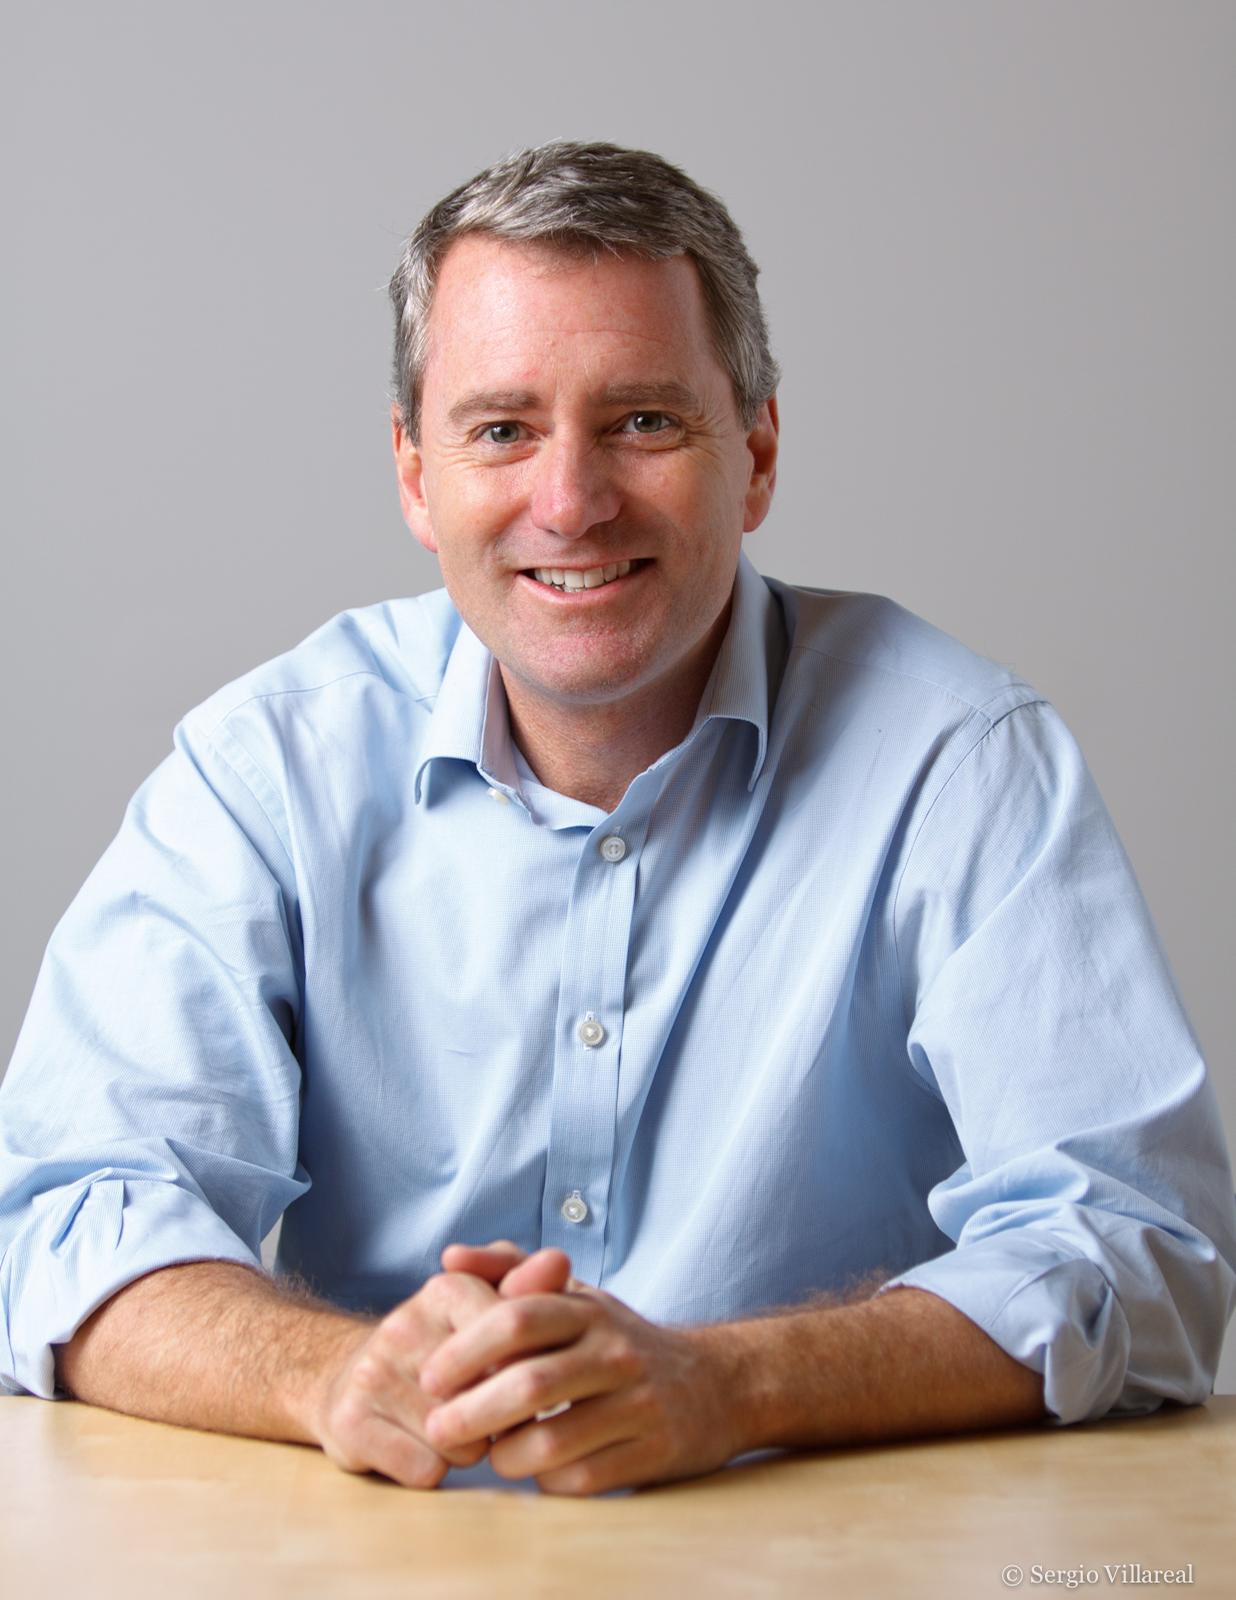 John Wood, founder of Room to Read, which brings education to 16.8 million children, will speak on purpose-driven companies and fast-changing corporate cultures / 